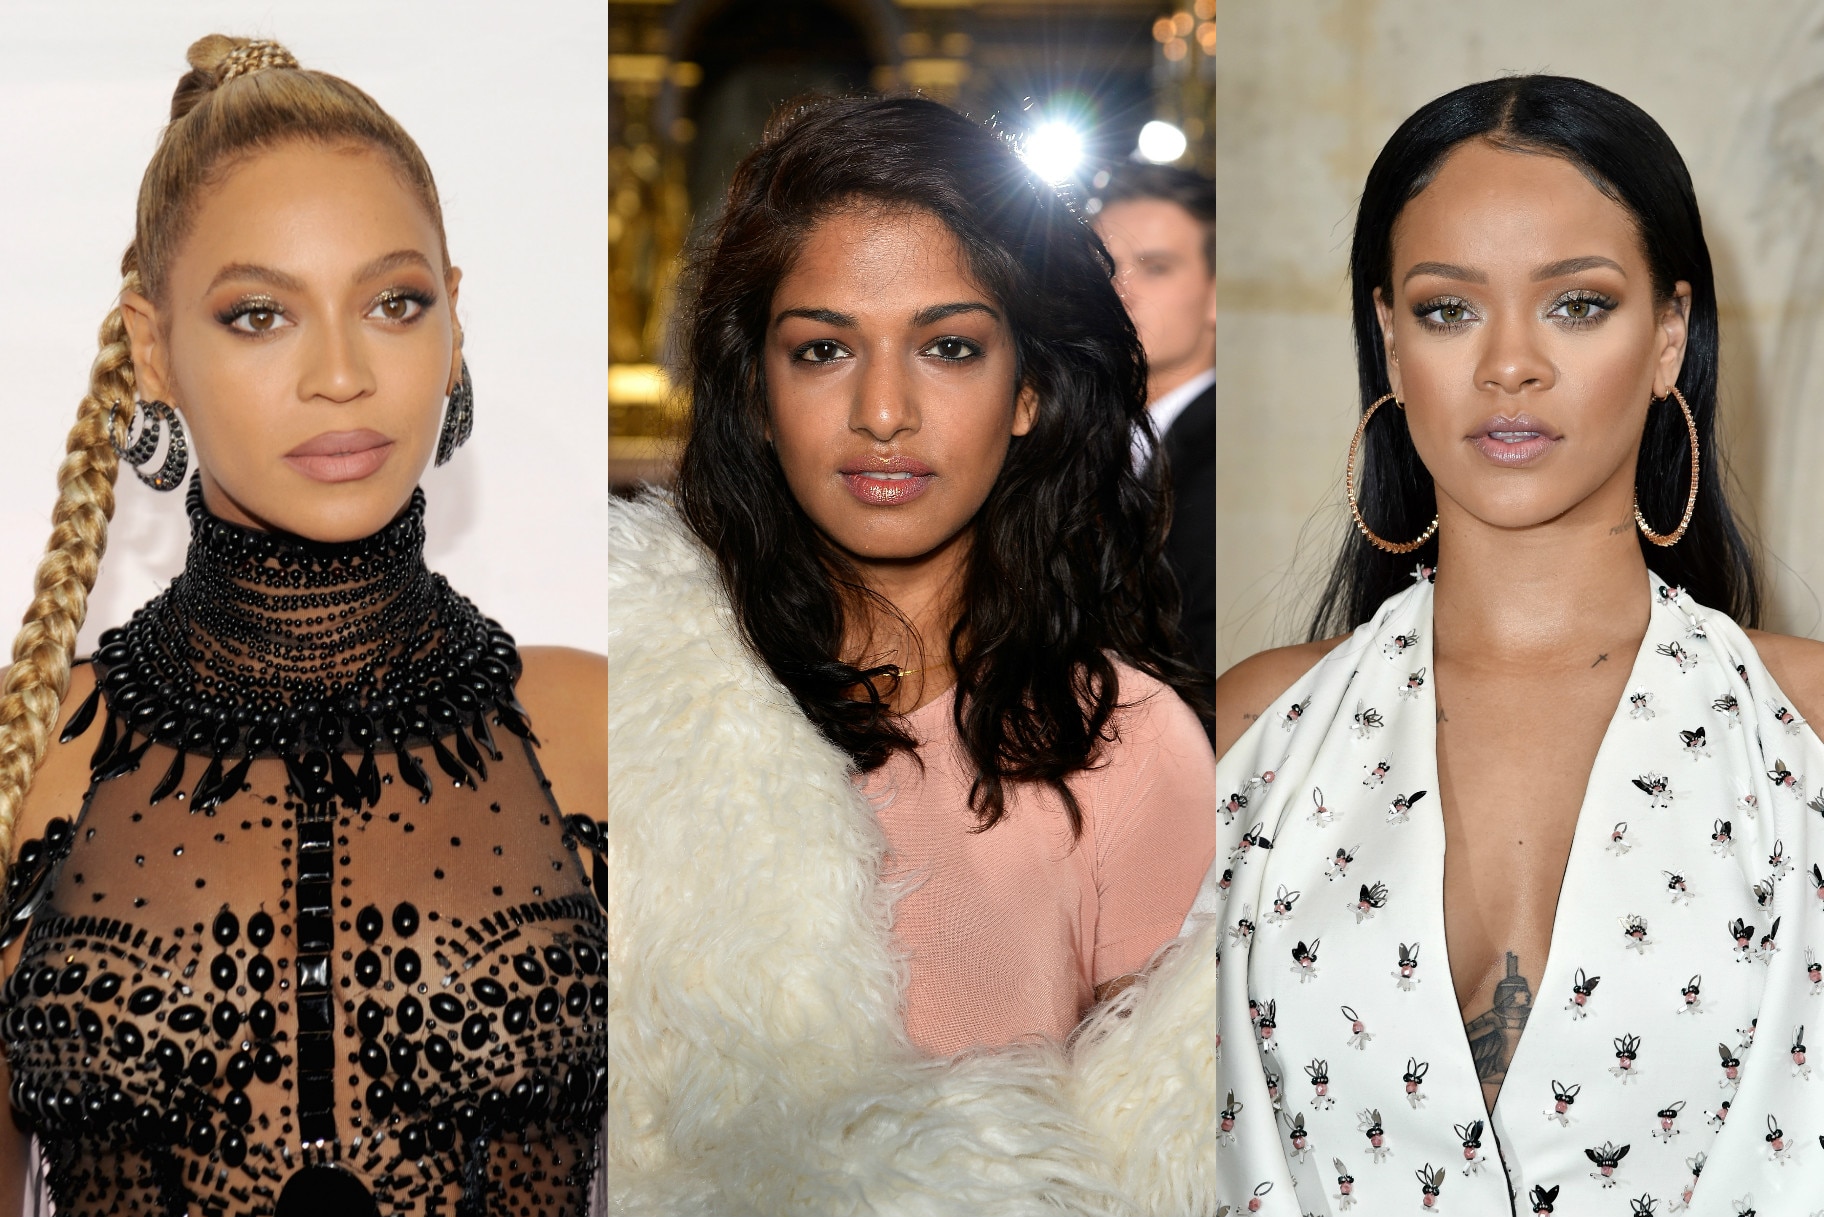 Did M.I.A. Just Accuse Beyonce And Rihanna Of Copying Her? | Very Real